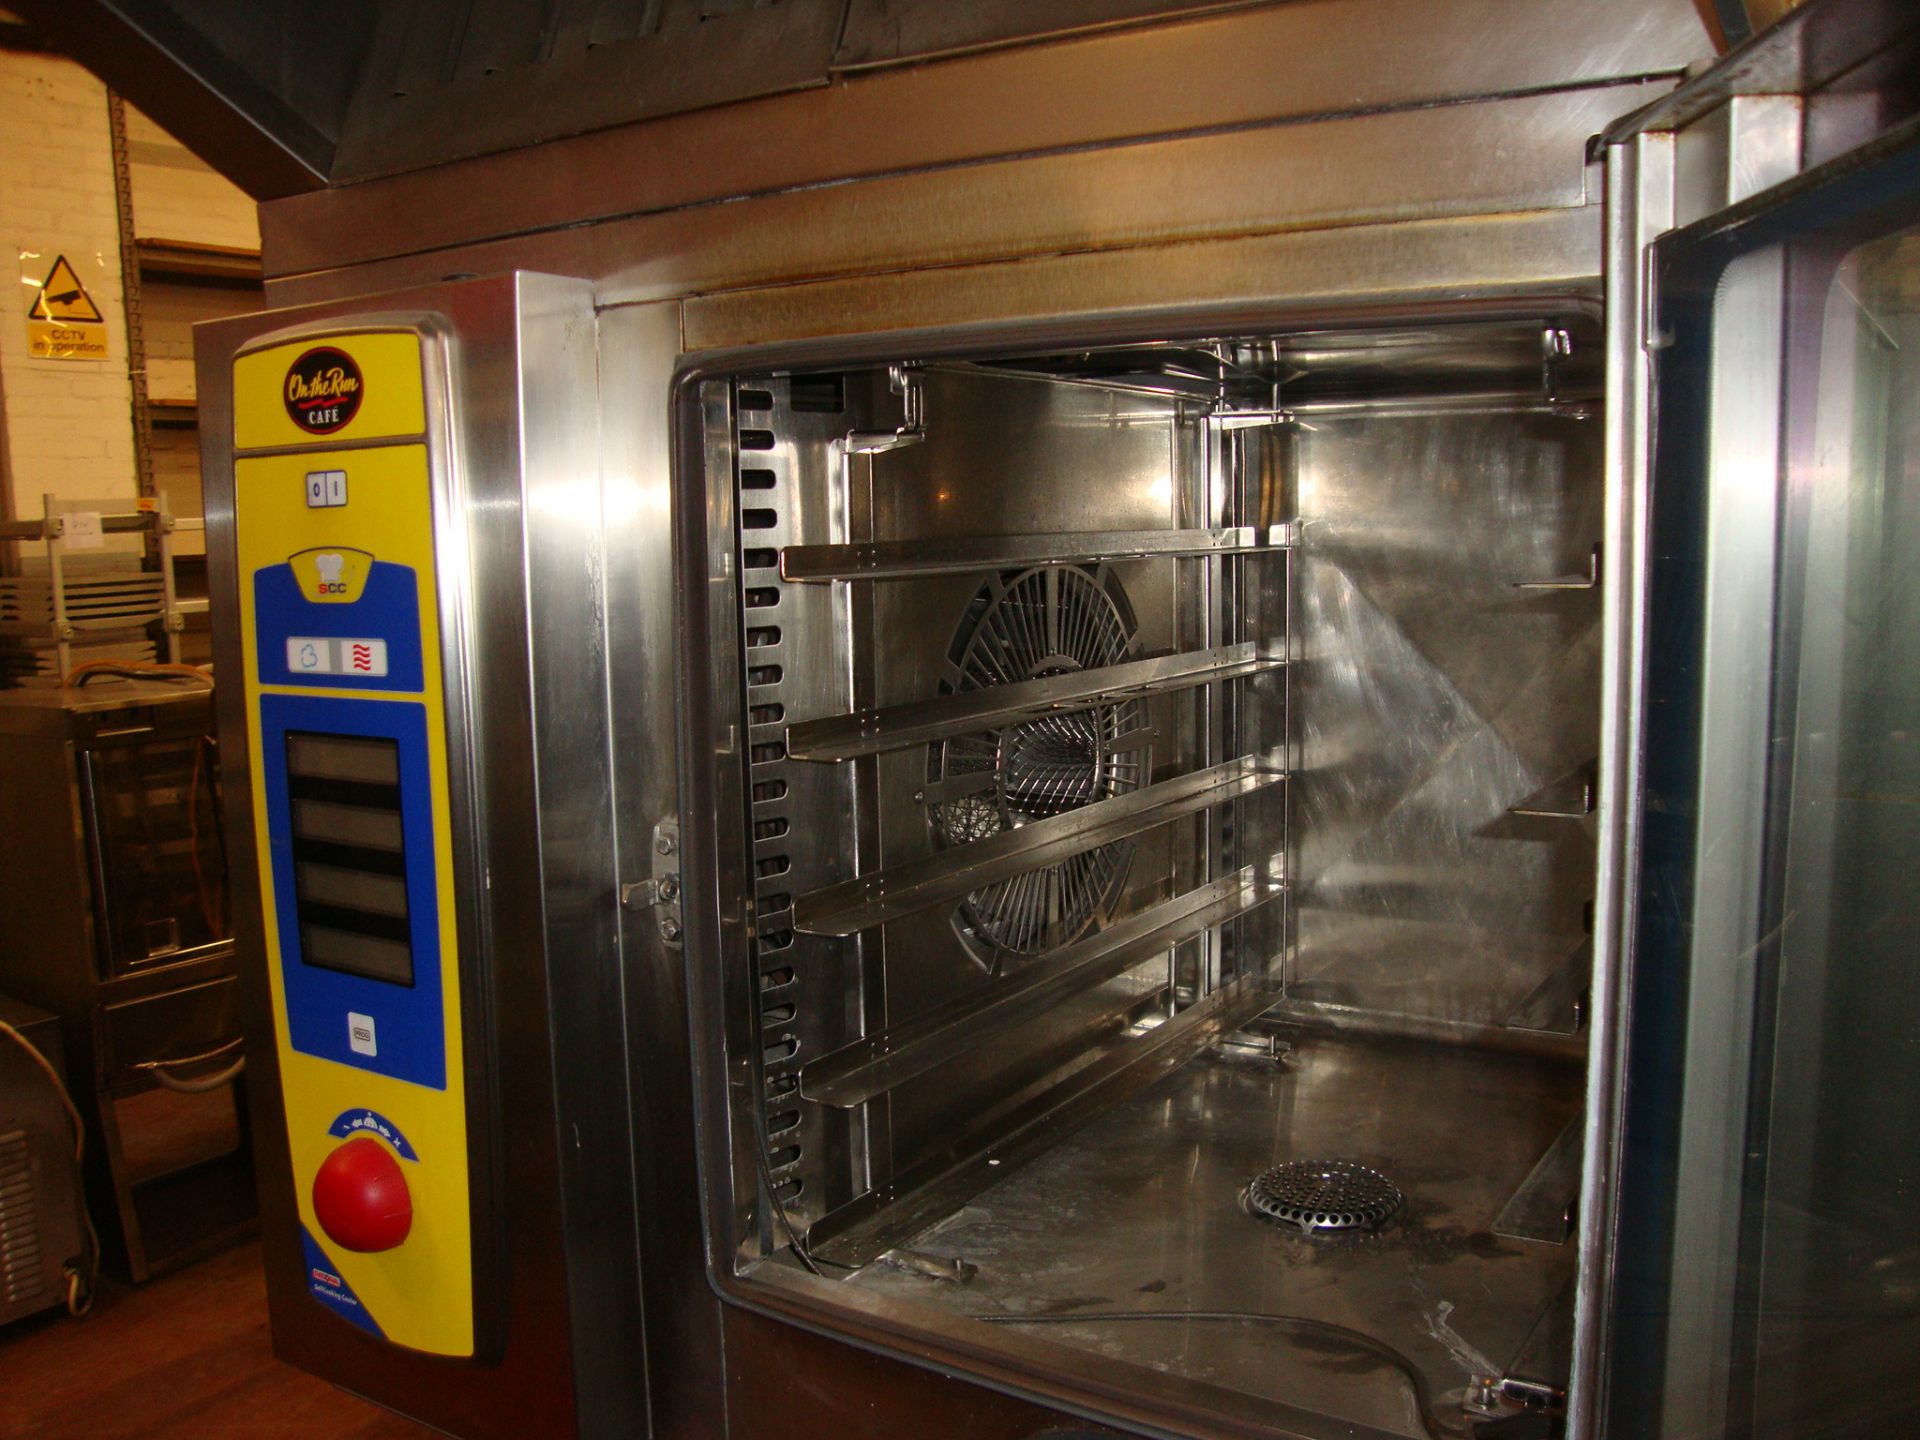 Rational model SCC 61 stainless steel commercial multifunction oven on dedicated tray - Image 4 of 10